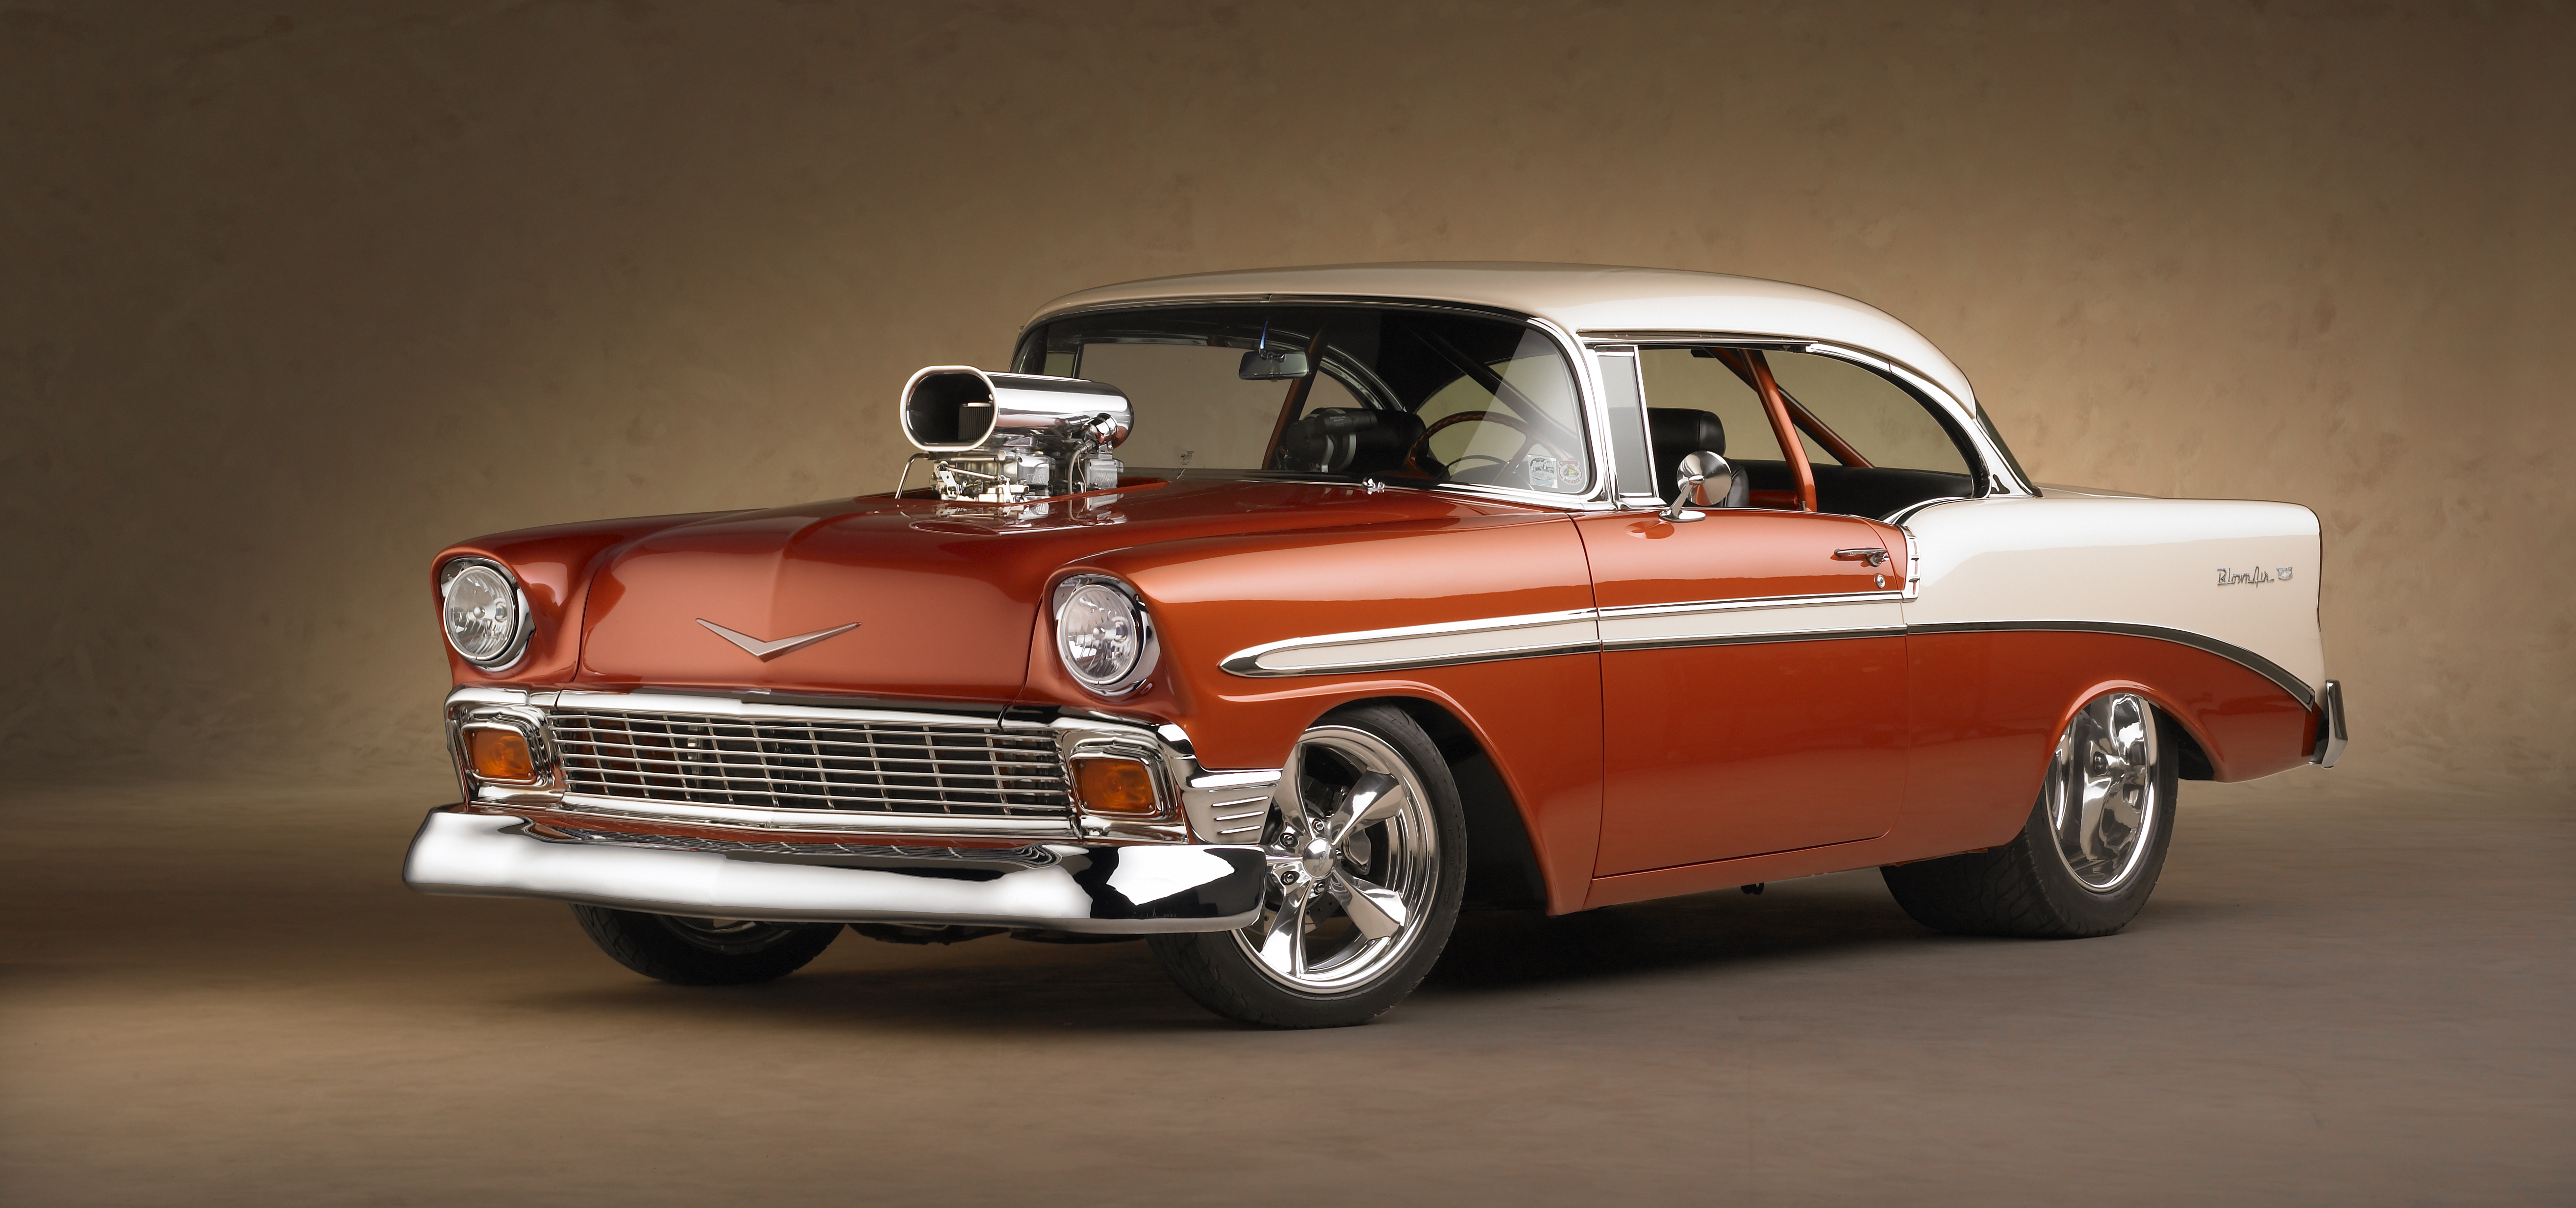 HD Quality Wallpaper | Collection: Vehicles, 5255x2465 Chevrolet Bel Air